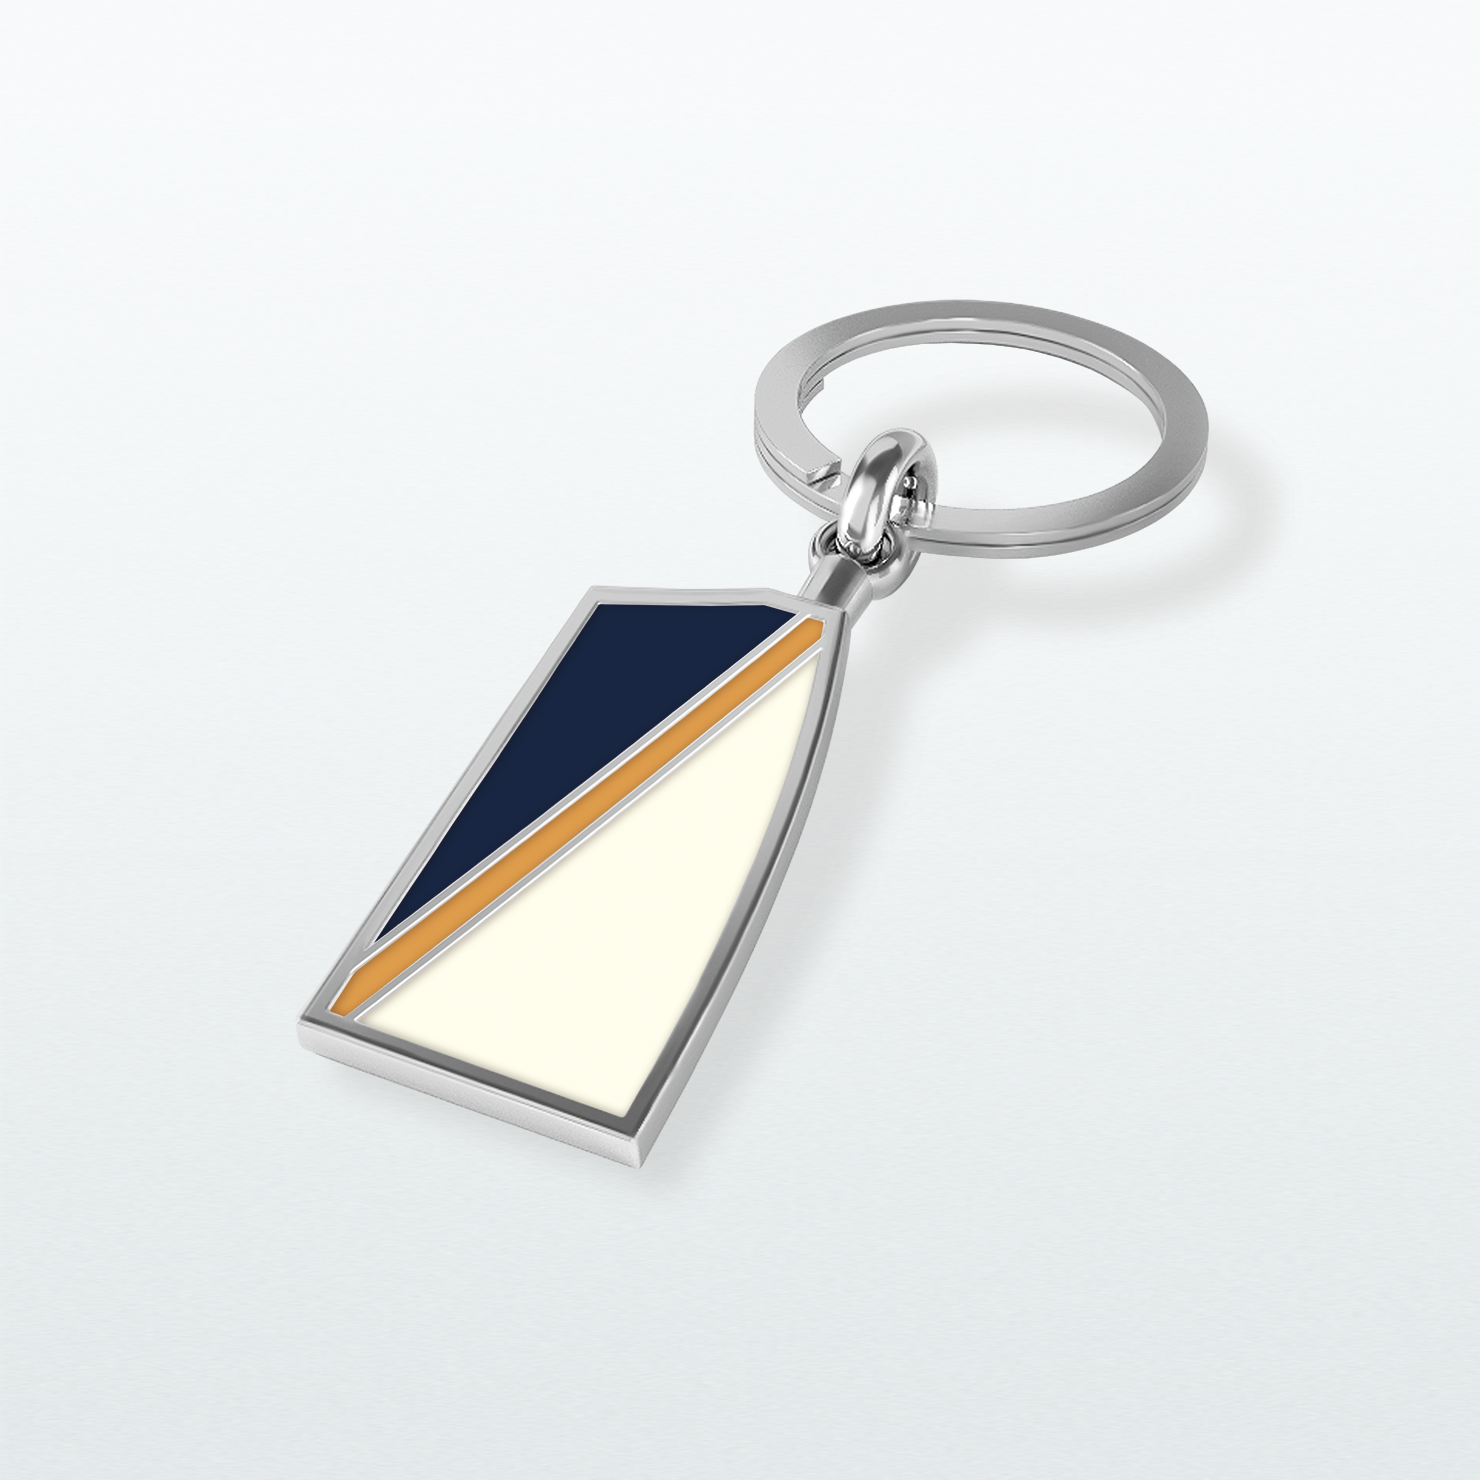 Unionville Key Chain - Strokeside Designs Rowing jewelry- Rowing Gifts Ideas- Rowing Coach Gifts